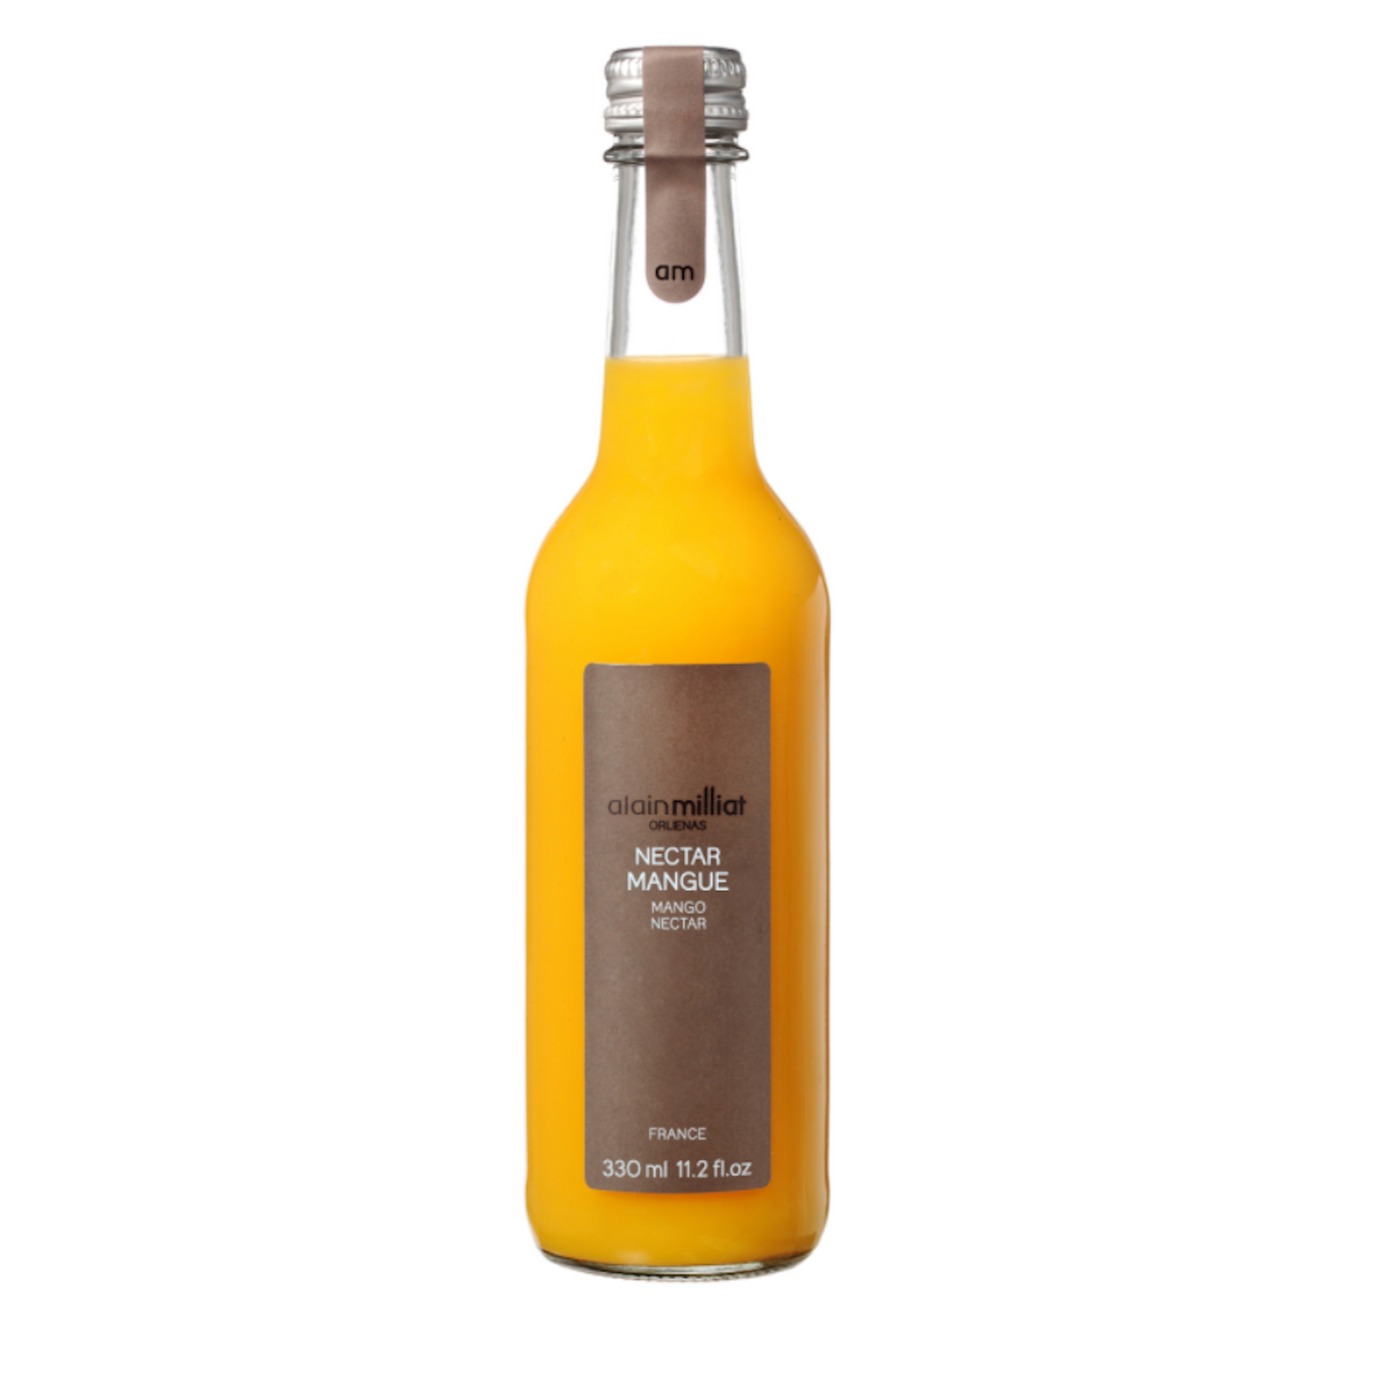 mango-nectar-alain-milliat-online-grocery-delivery-singapore-thenewgrocer